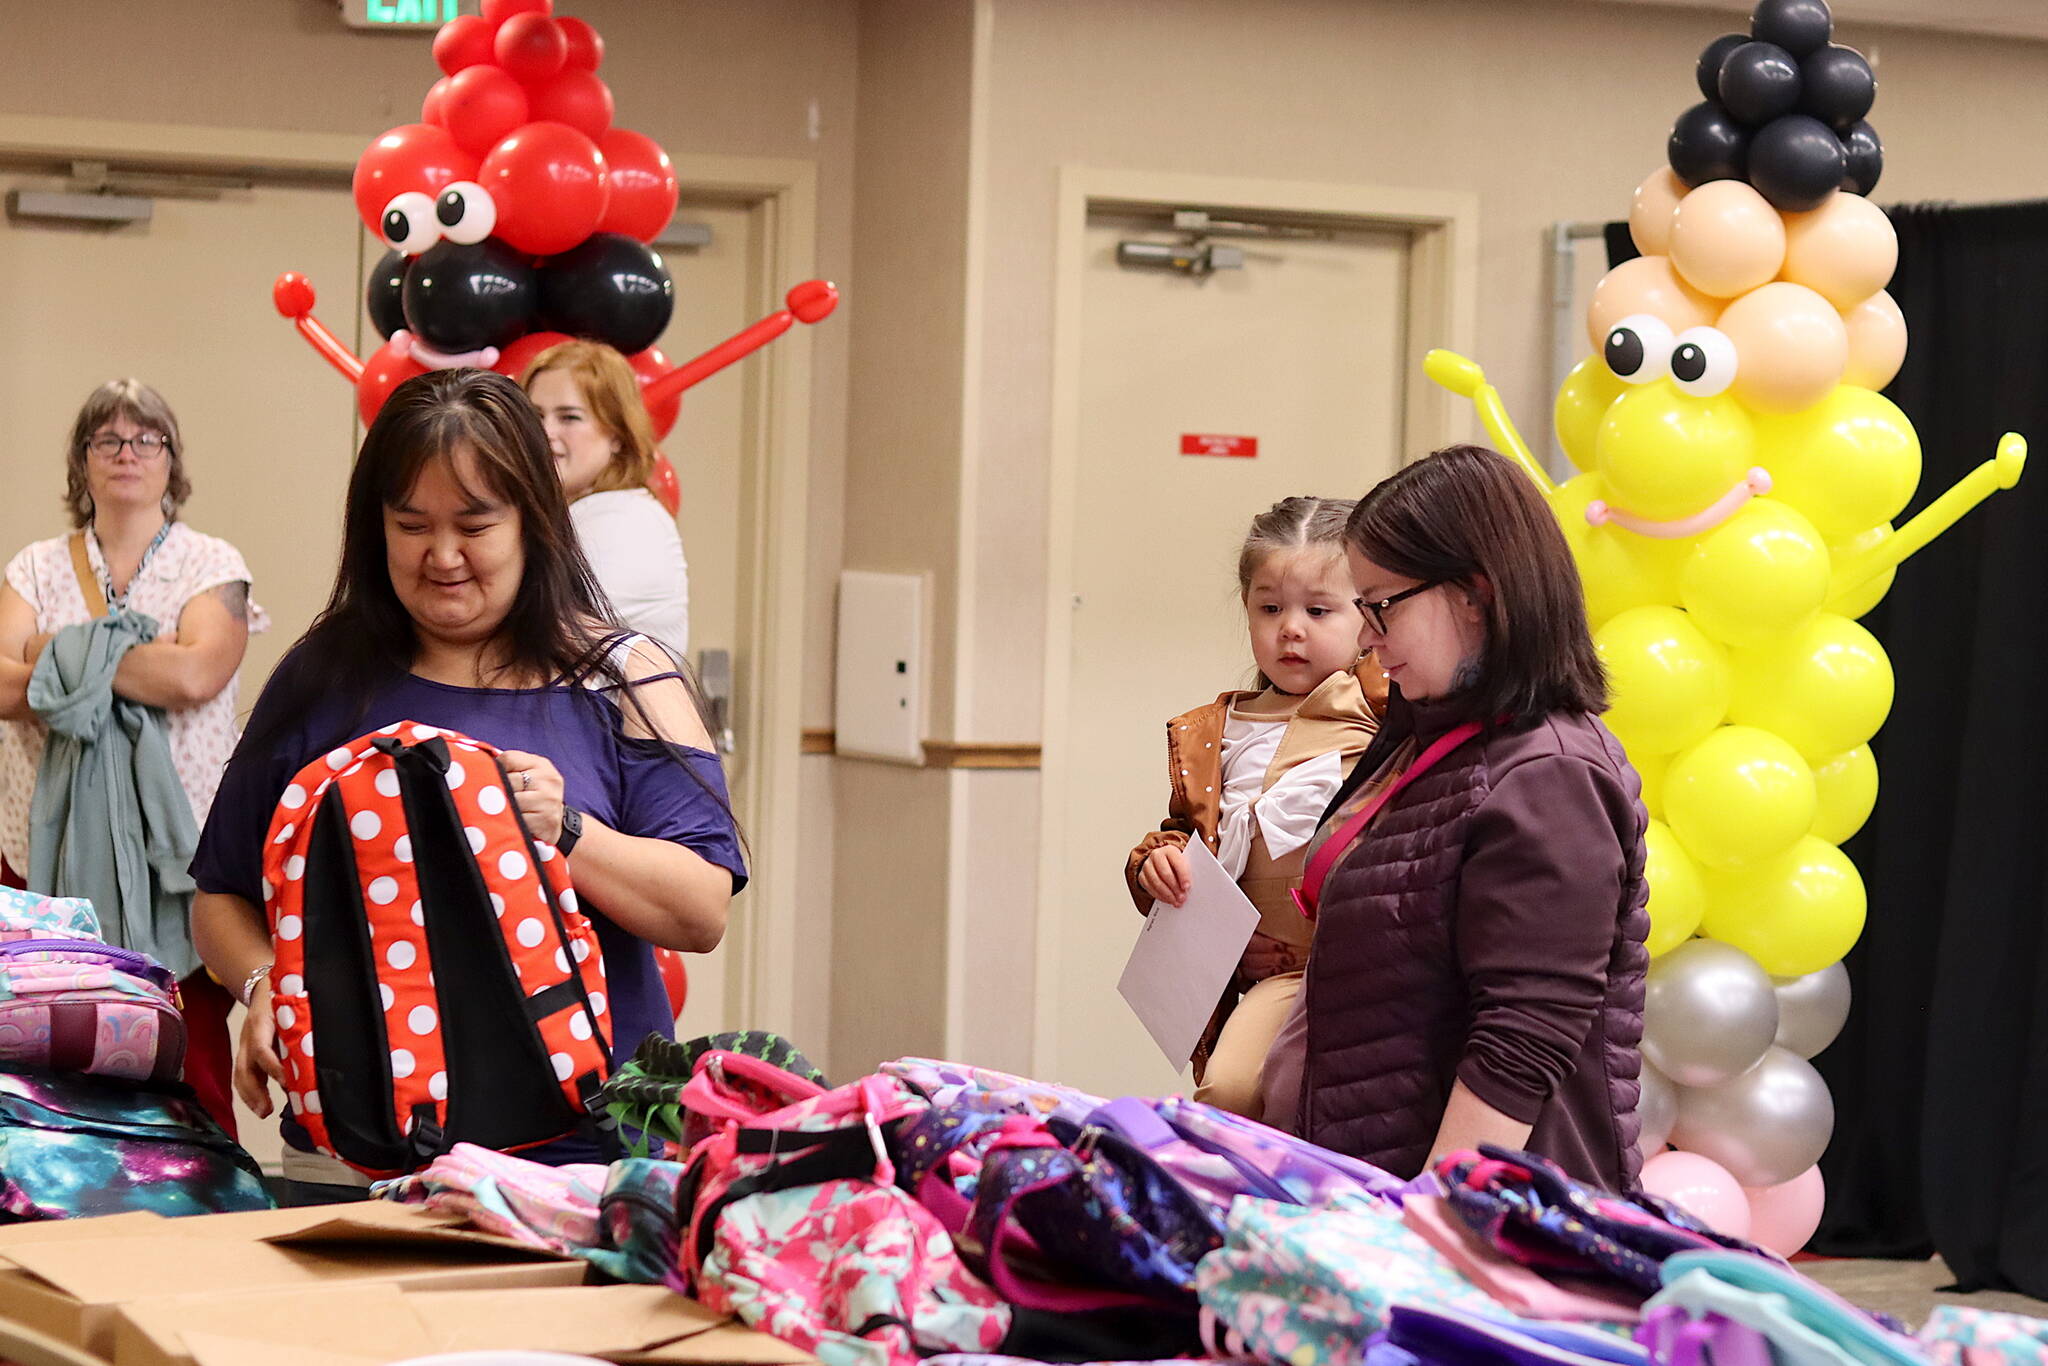 Photos by Mark Sabbatini / Juneau Empire
Alicia Bagoyo, right and her daughter, Madalyn, look for a pre-kindergarten backpack with assistance from staff member Julie James during the Central Council of the Tlingit and Haida Indian Tribes of Alaska’s annual backpack distribution at Elizabeth Peratrovich Hall on Saturday.